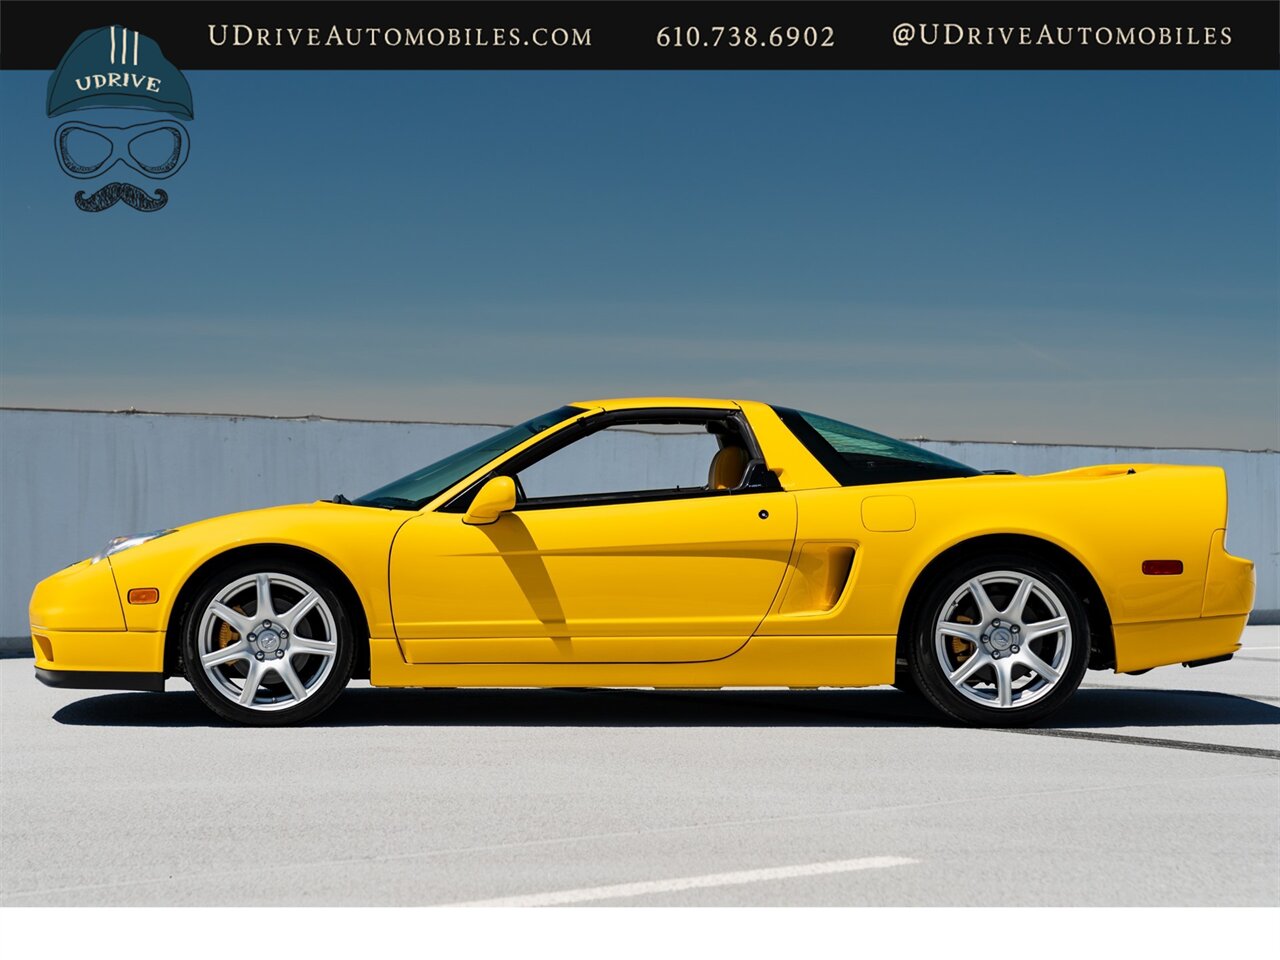 2003 Acura NSX NSX-T  Spa Yellow over Yellow Lthr 1 of 13 Produced - Photo 9 - West Chester, PA 19382